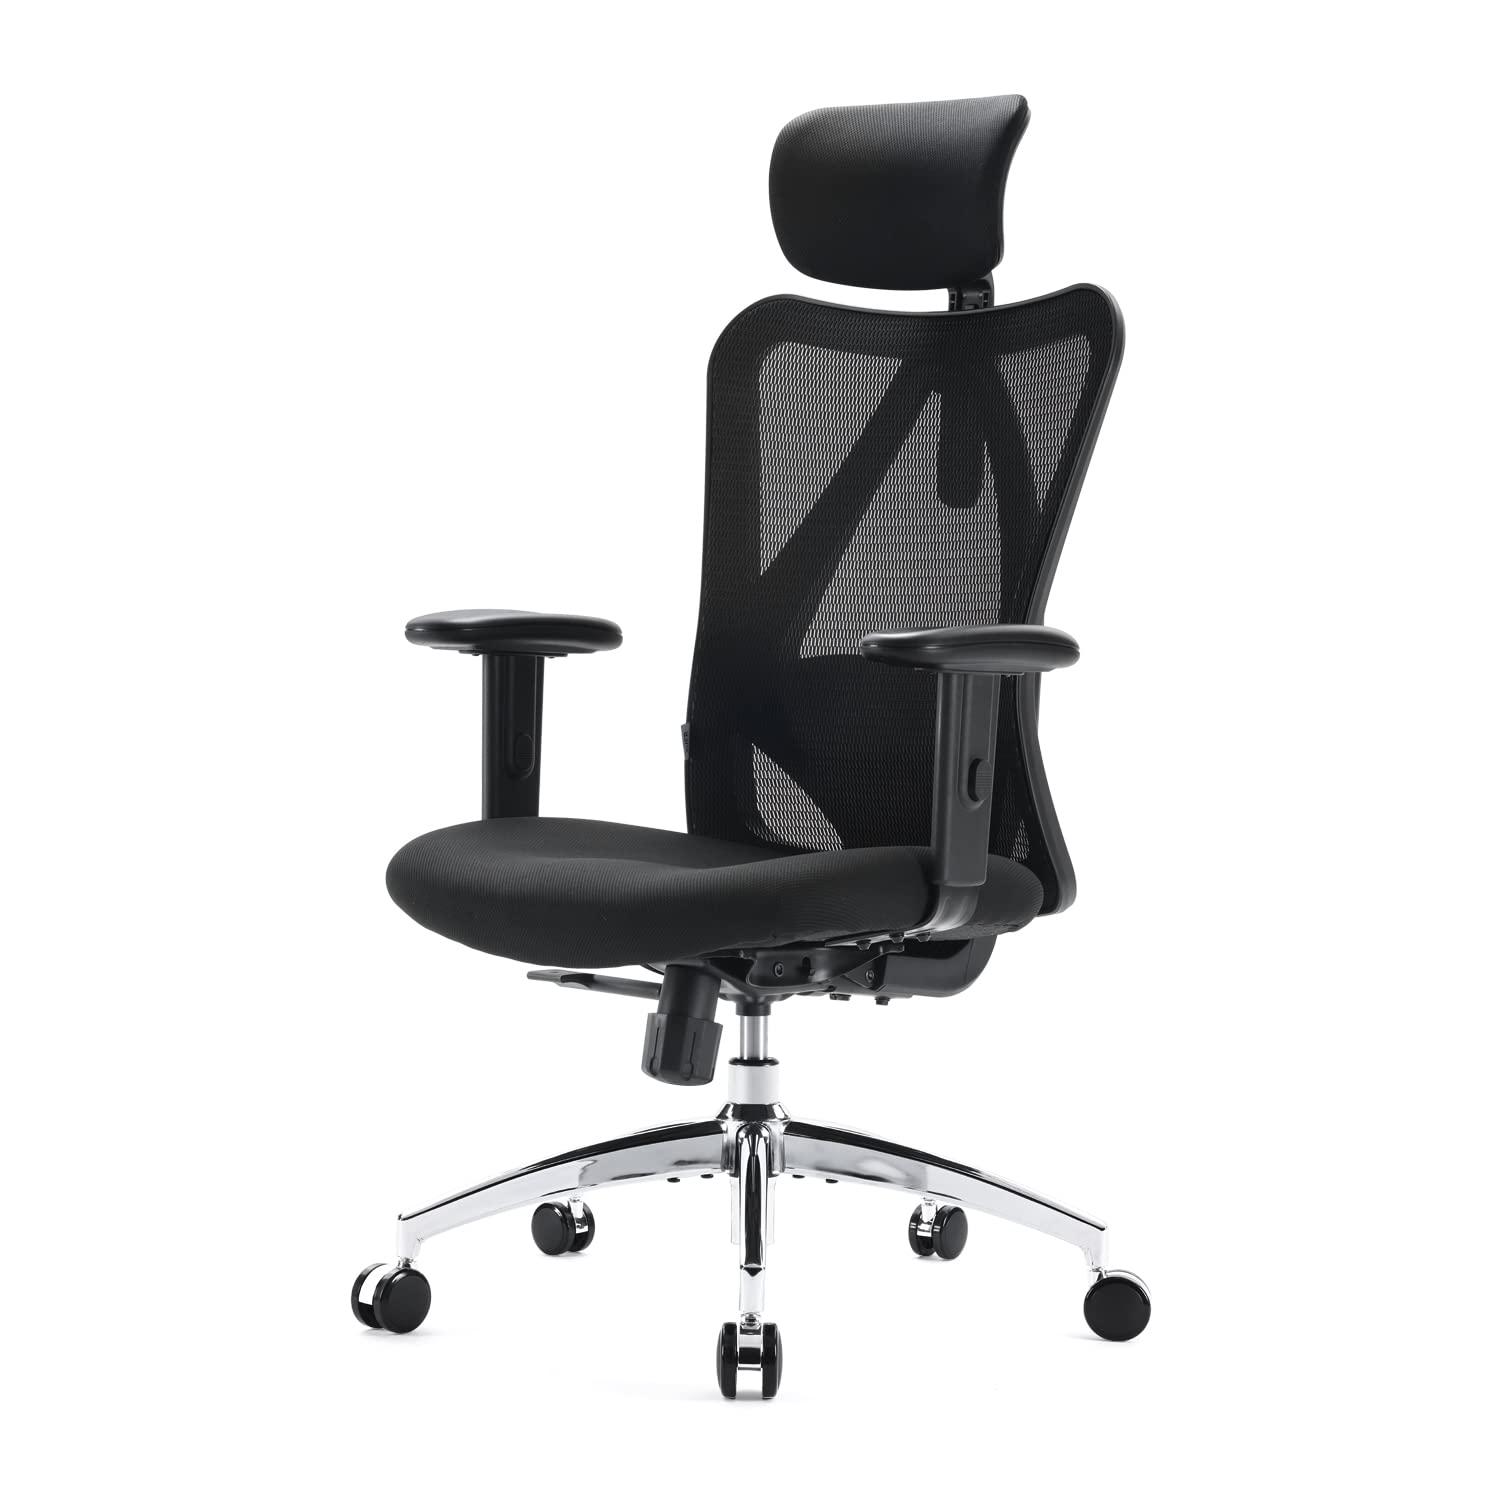 SIHOO M18 Ergonomic Office Chair for Big and Tall People Adjustable Headrest with 2D Armrest - $129.09